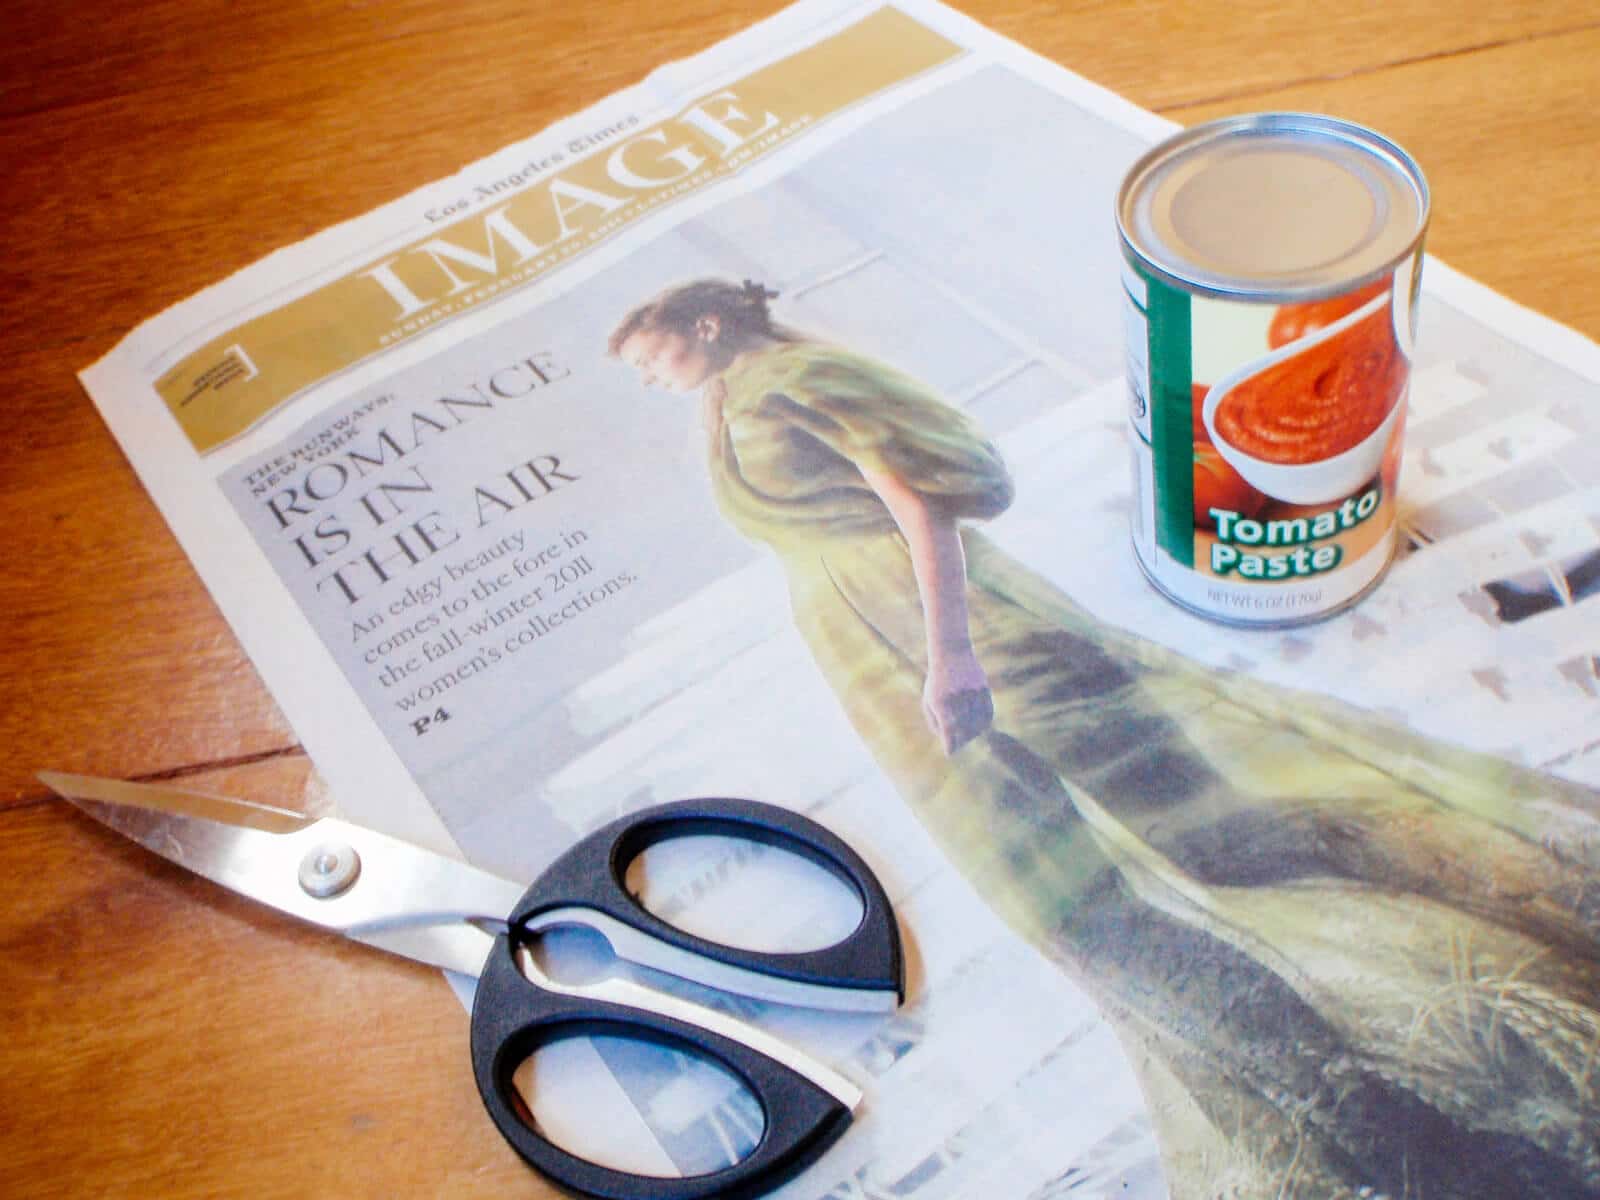 Gather a stack of newspaper, scissors, and a can of tomato paste to make your newspaper seed pots